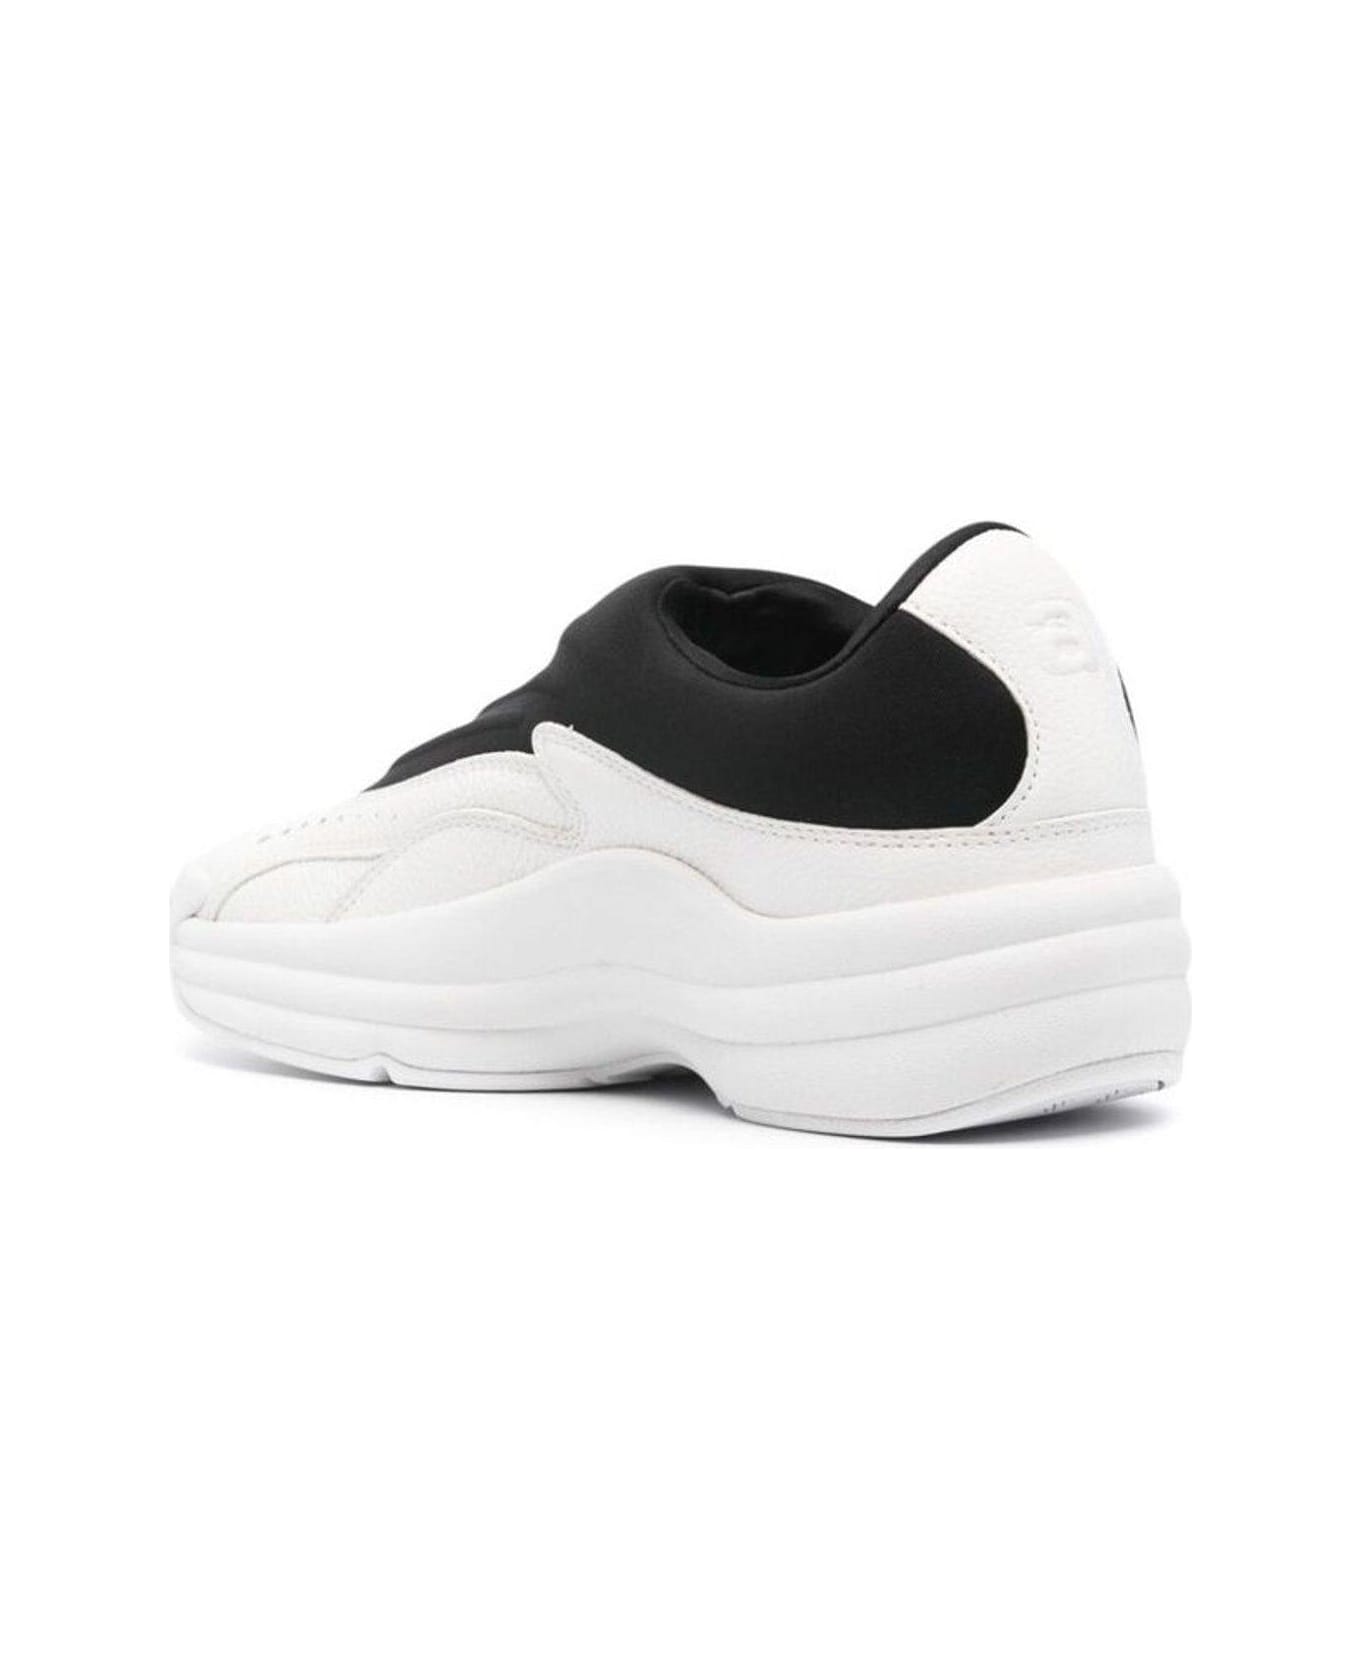 Alexander Wang Lace-up Sneakers - BLACK/WHITE